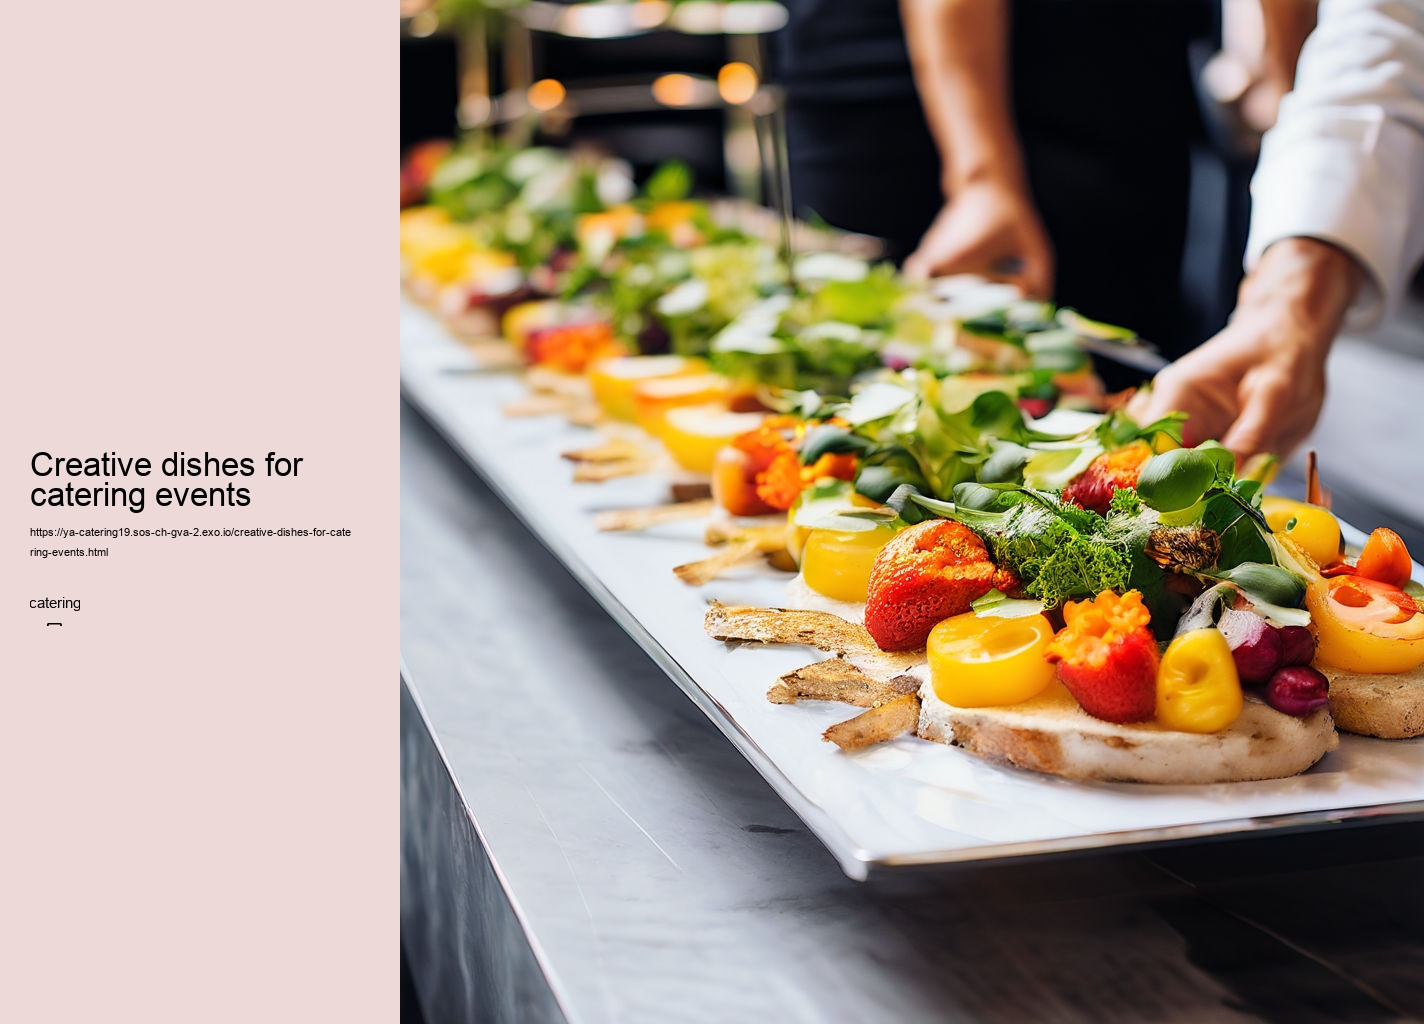 Creative dishes for catering events